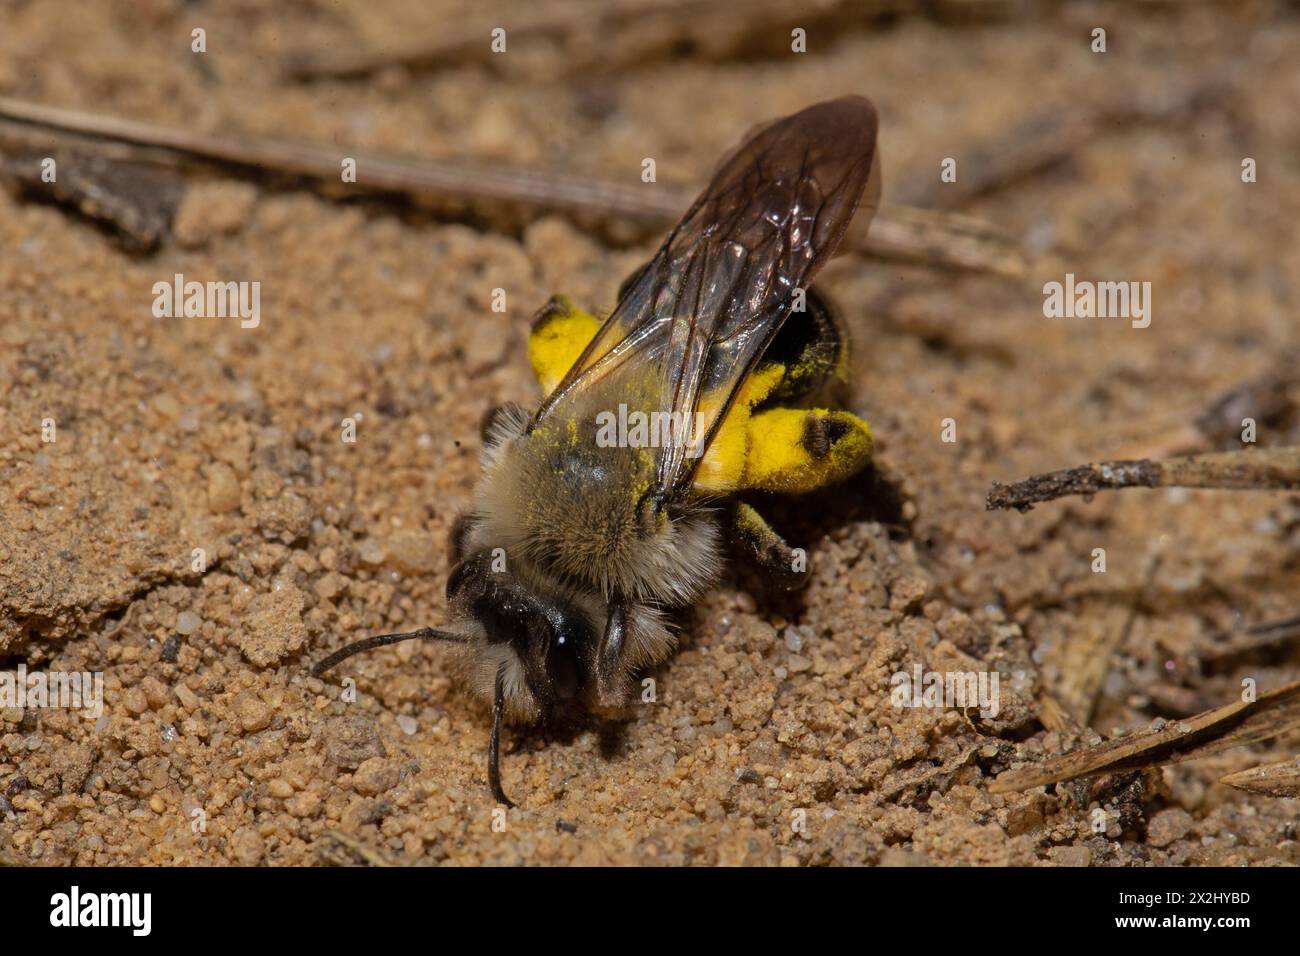 Willow sand bee with yellow pollen sitting on sand looking diagonally left Stock Photo